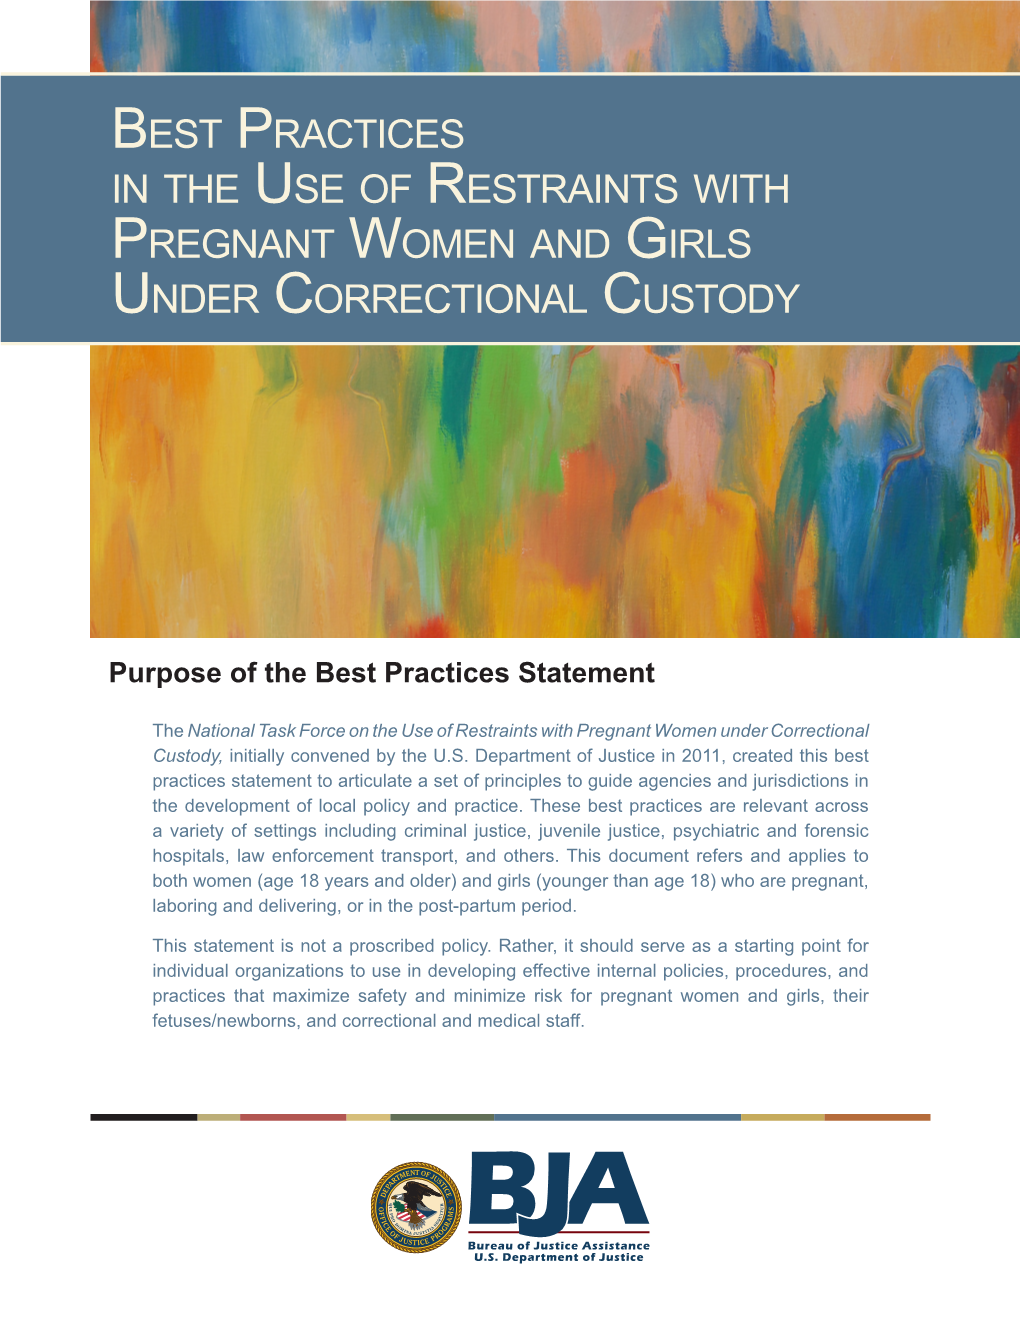 Best Practices in the Use of Restraints with Pregnant Women and Girls Under Correctional Custody